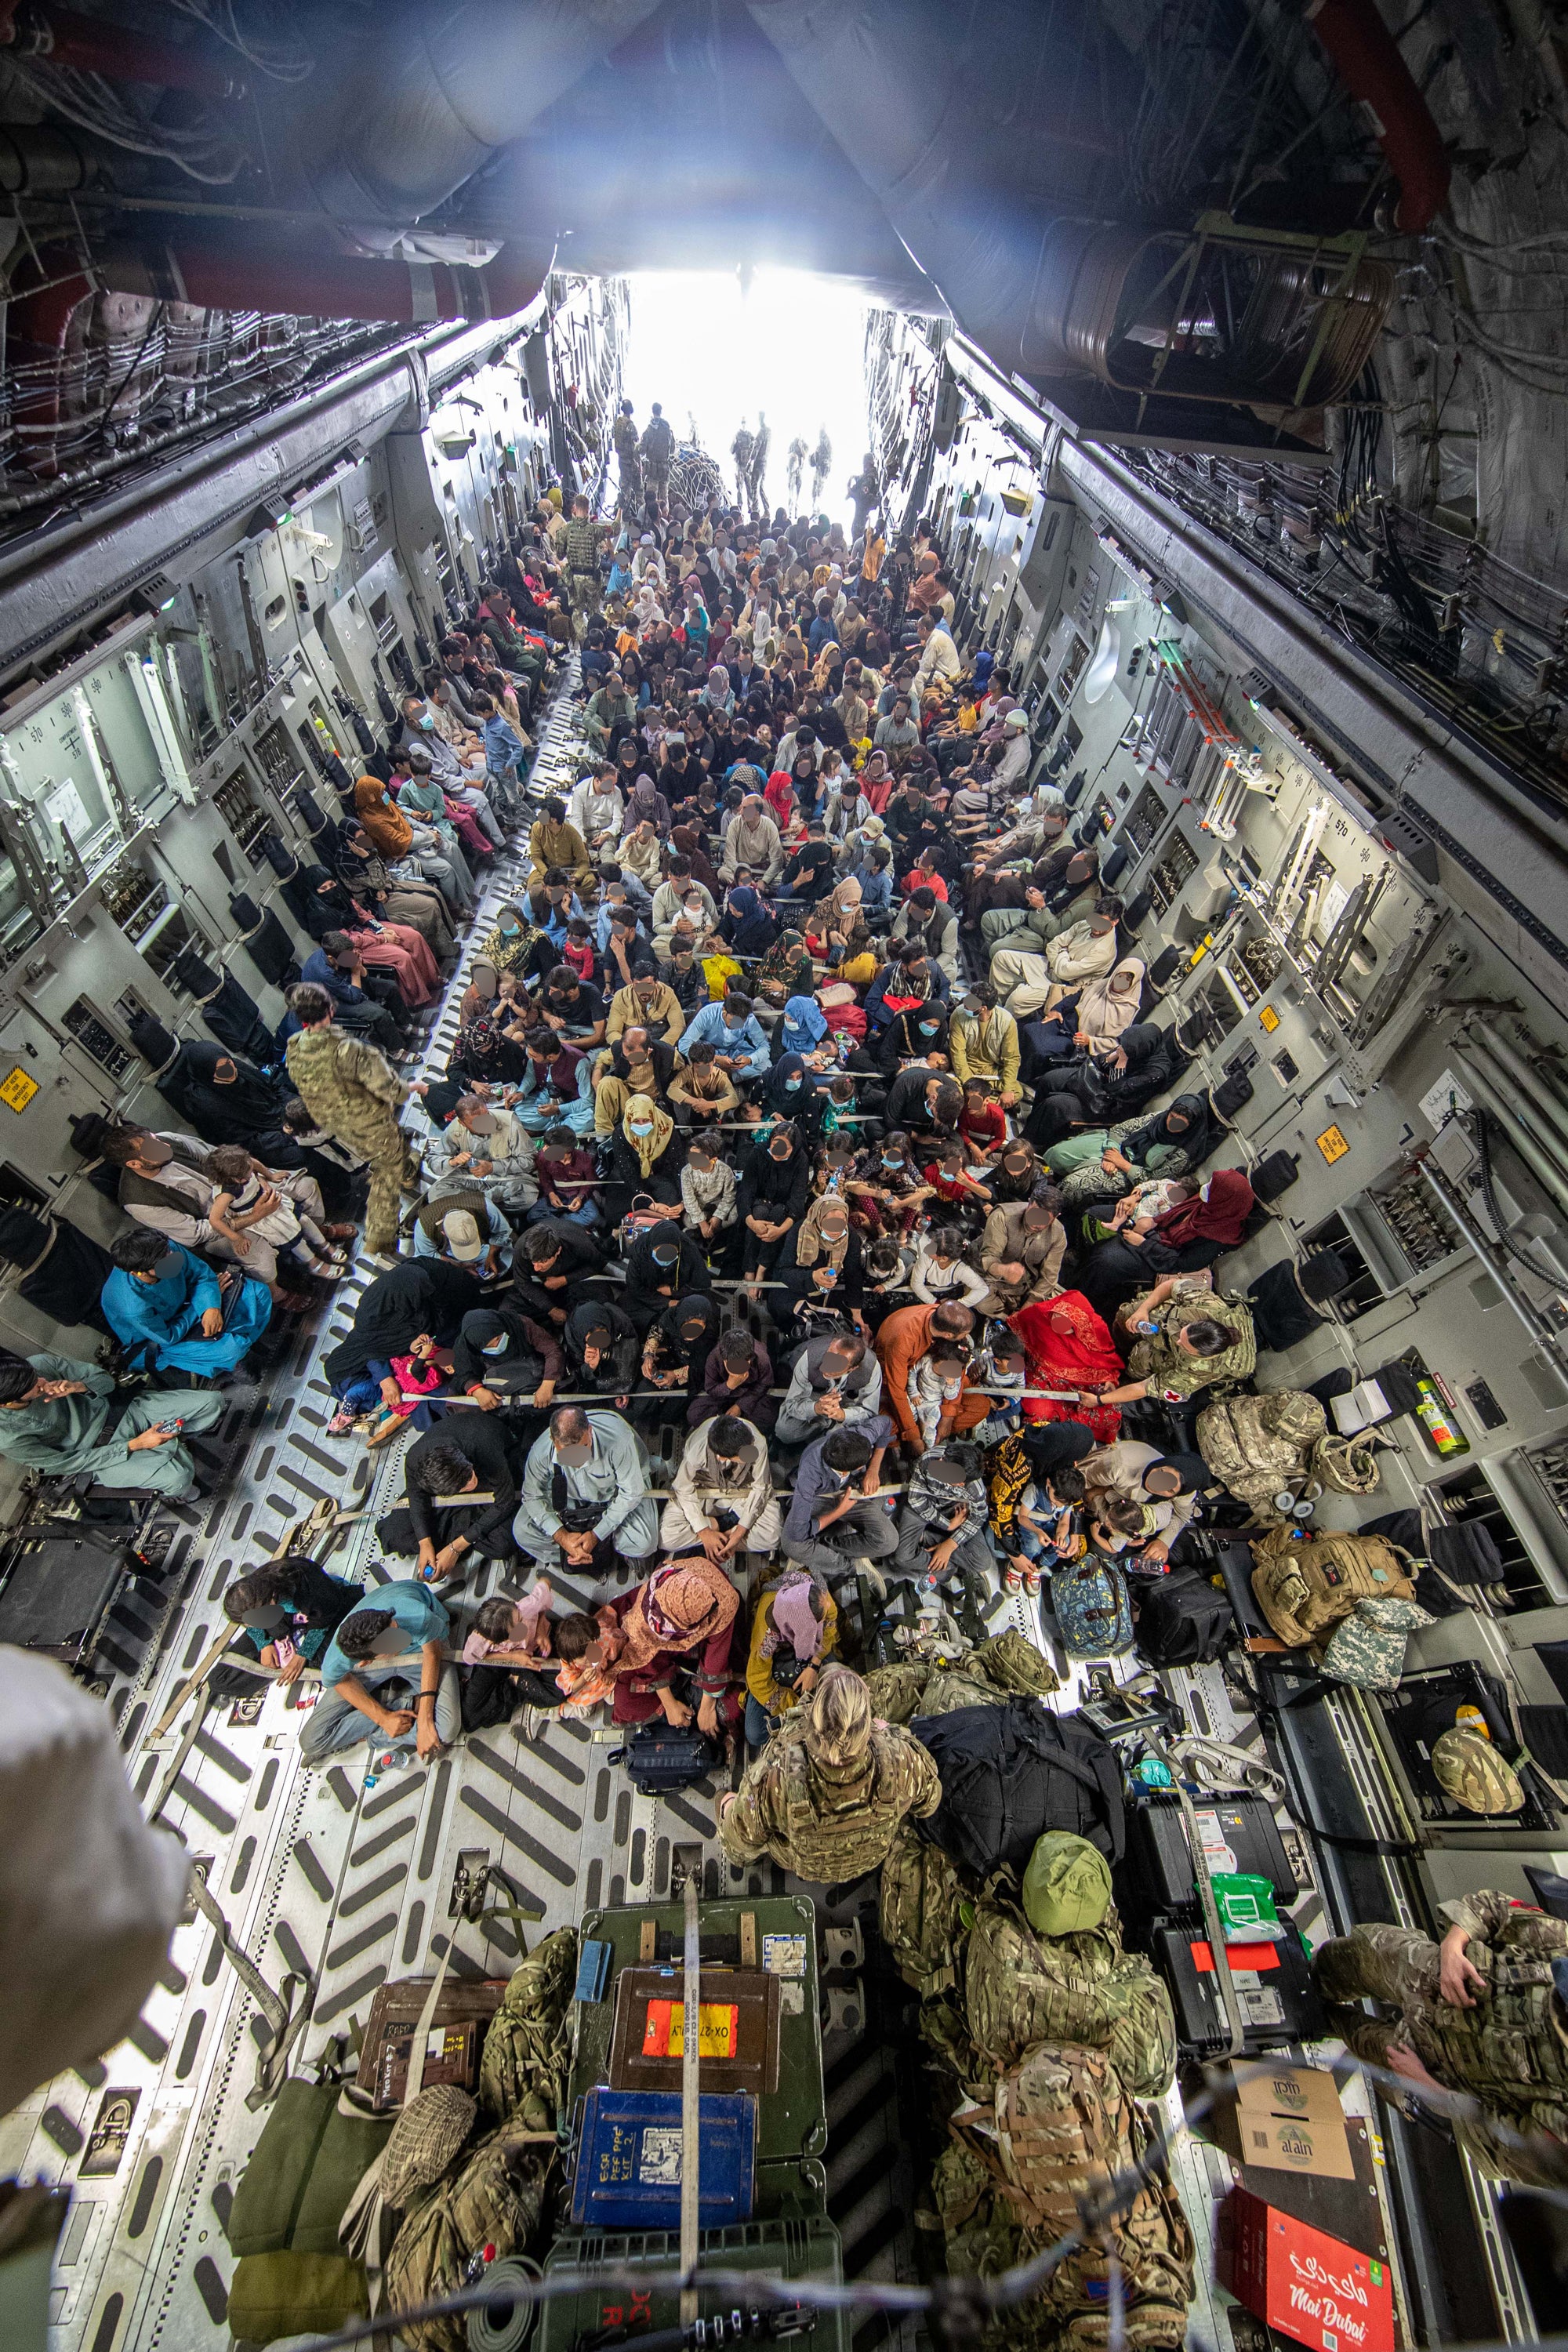 Handout photo issued by the Ministry of Defence (MoD) of a full flight of 265 people supported by members of the UK Armed Forces on board an evacuation flight out of Kabul airport under Operation Pitting (LPhot Ben Shread/MoD/PA)